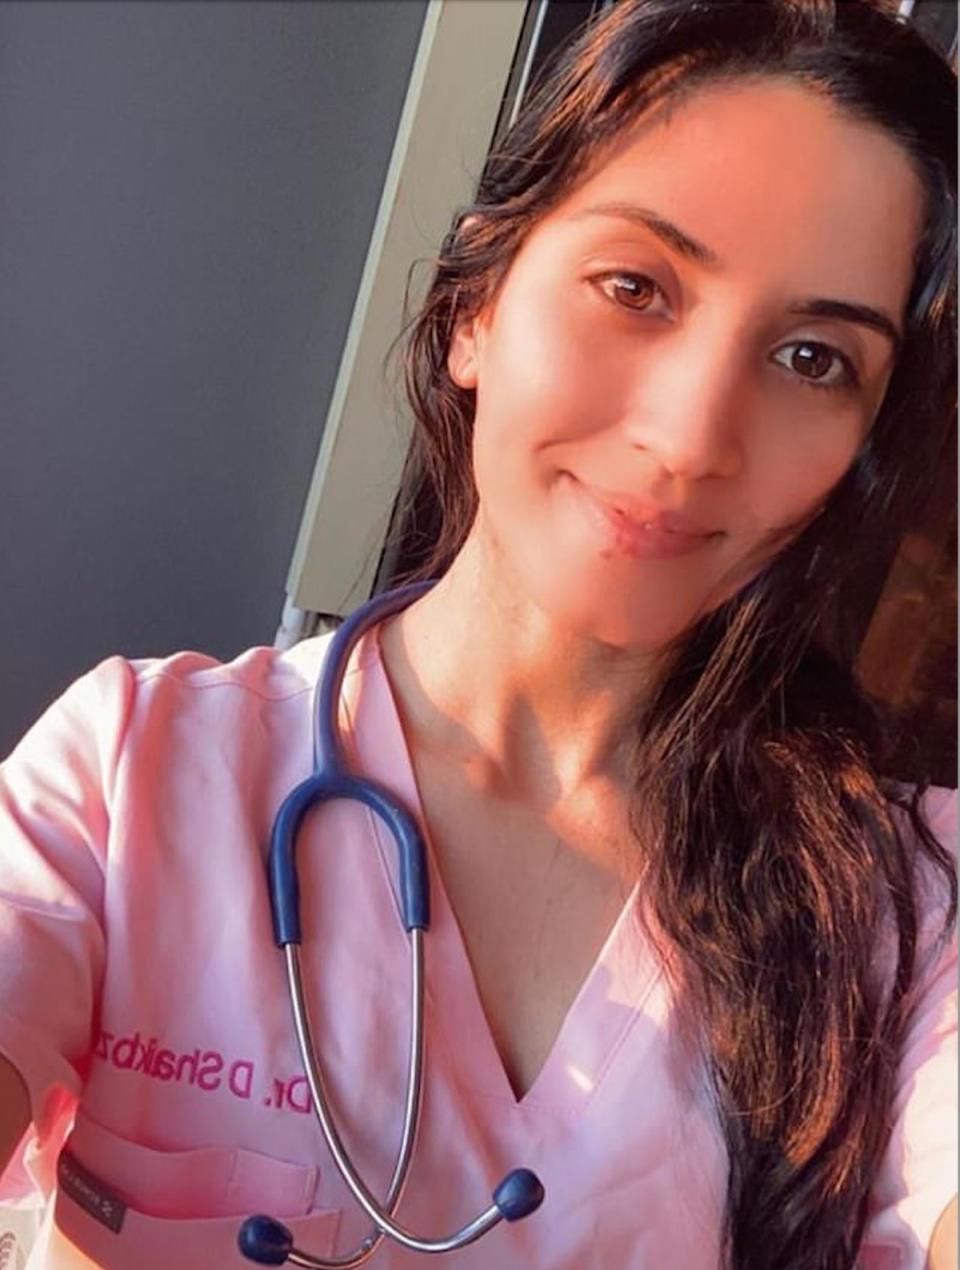 ‘Dr’ Karezi poses in pink scrubs and a stethoscope on Instagram (@dr.dalya.s / Instagram)